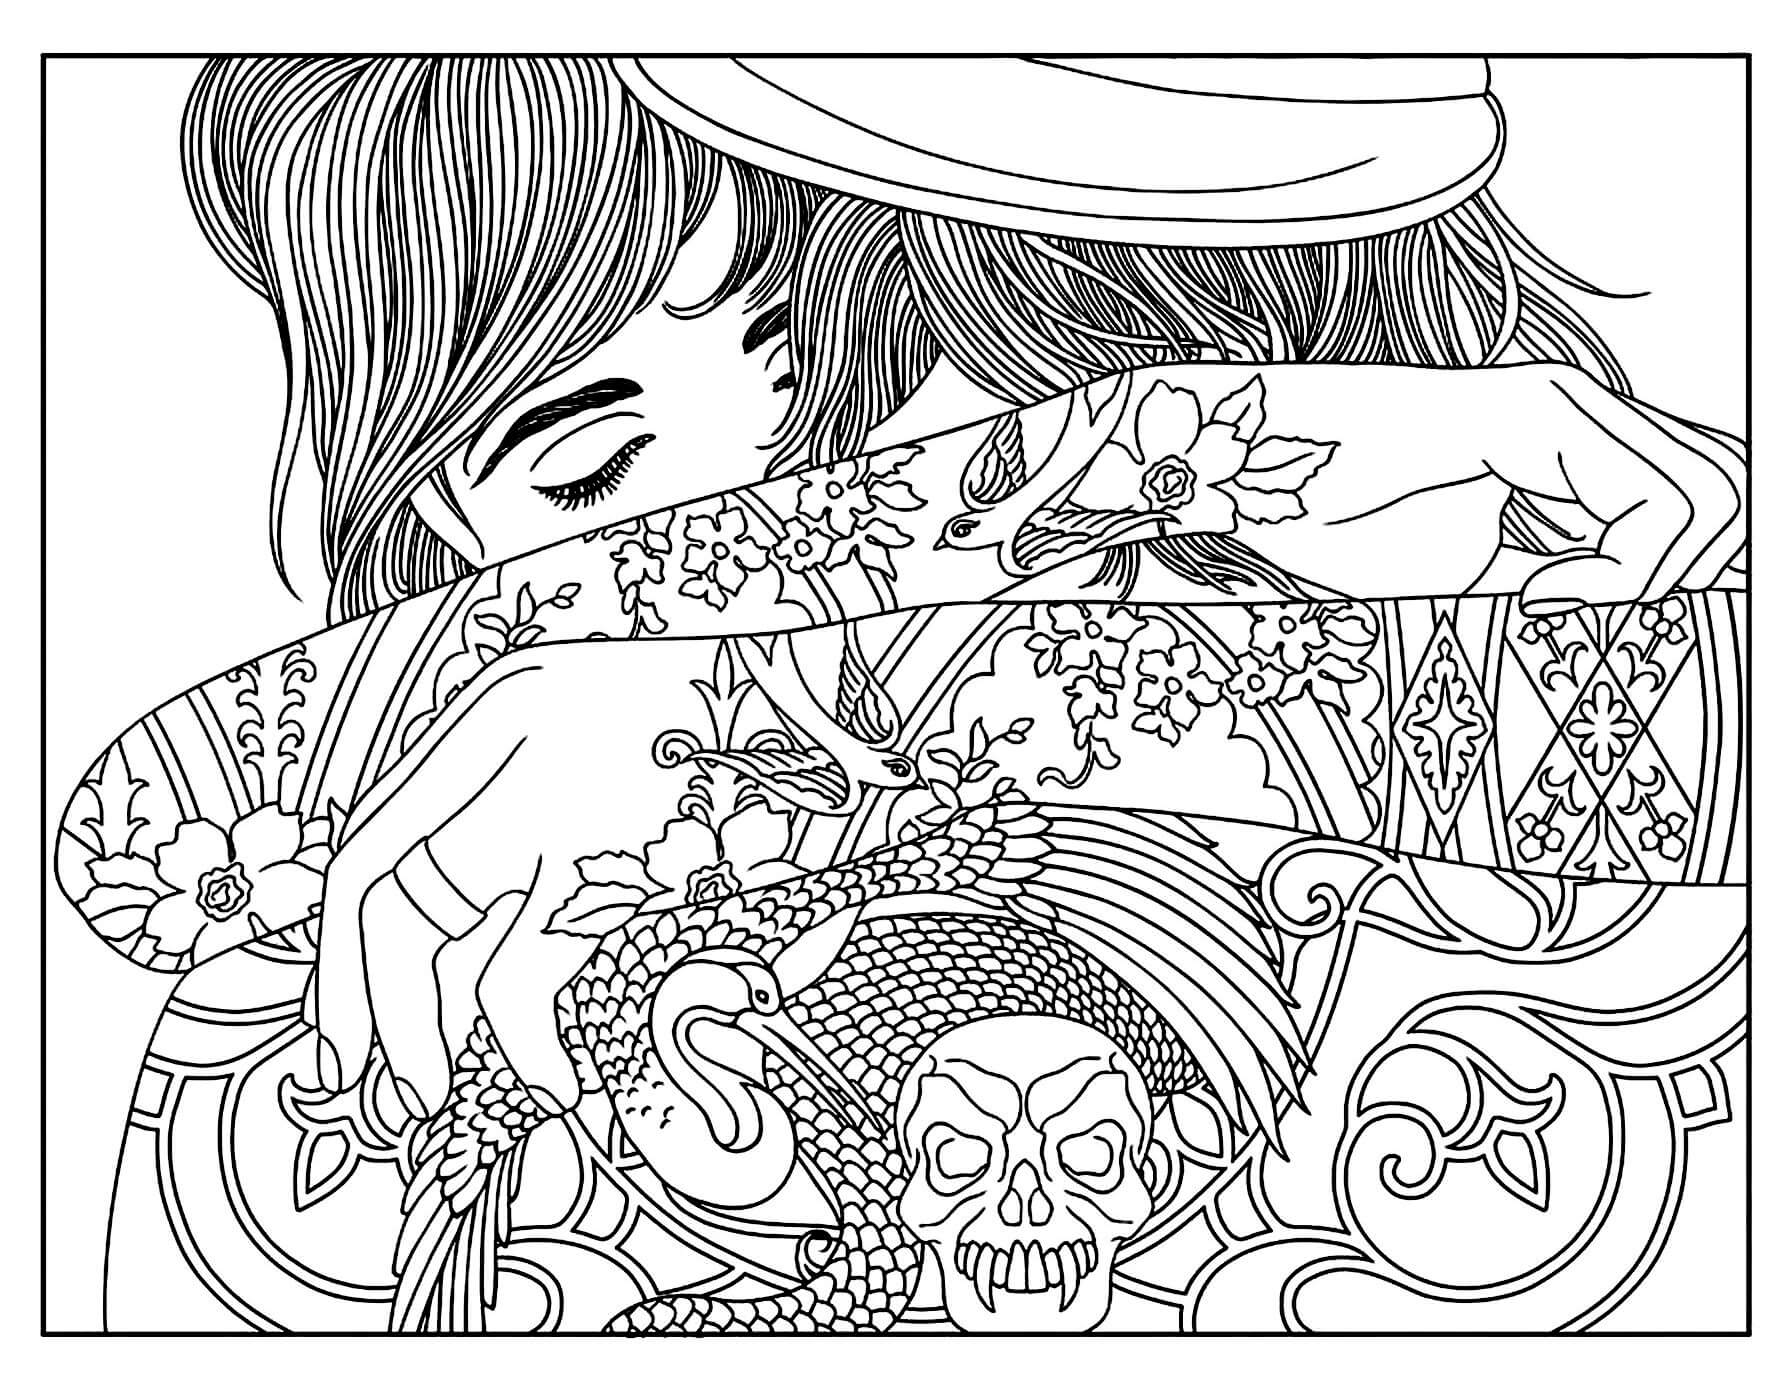 Tattoo Hug Coloring Pages for Teens